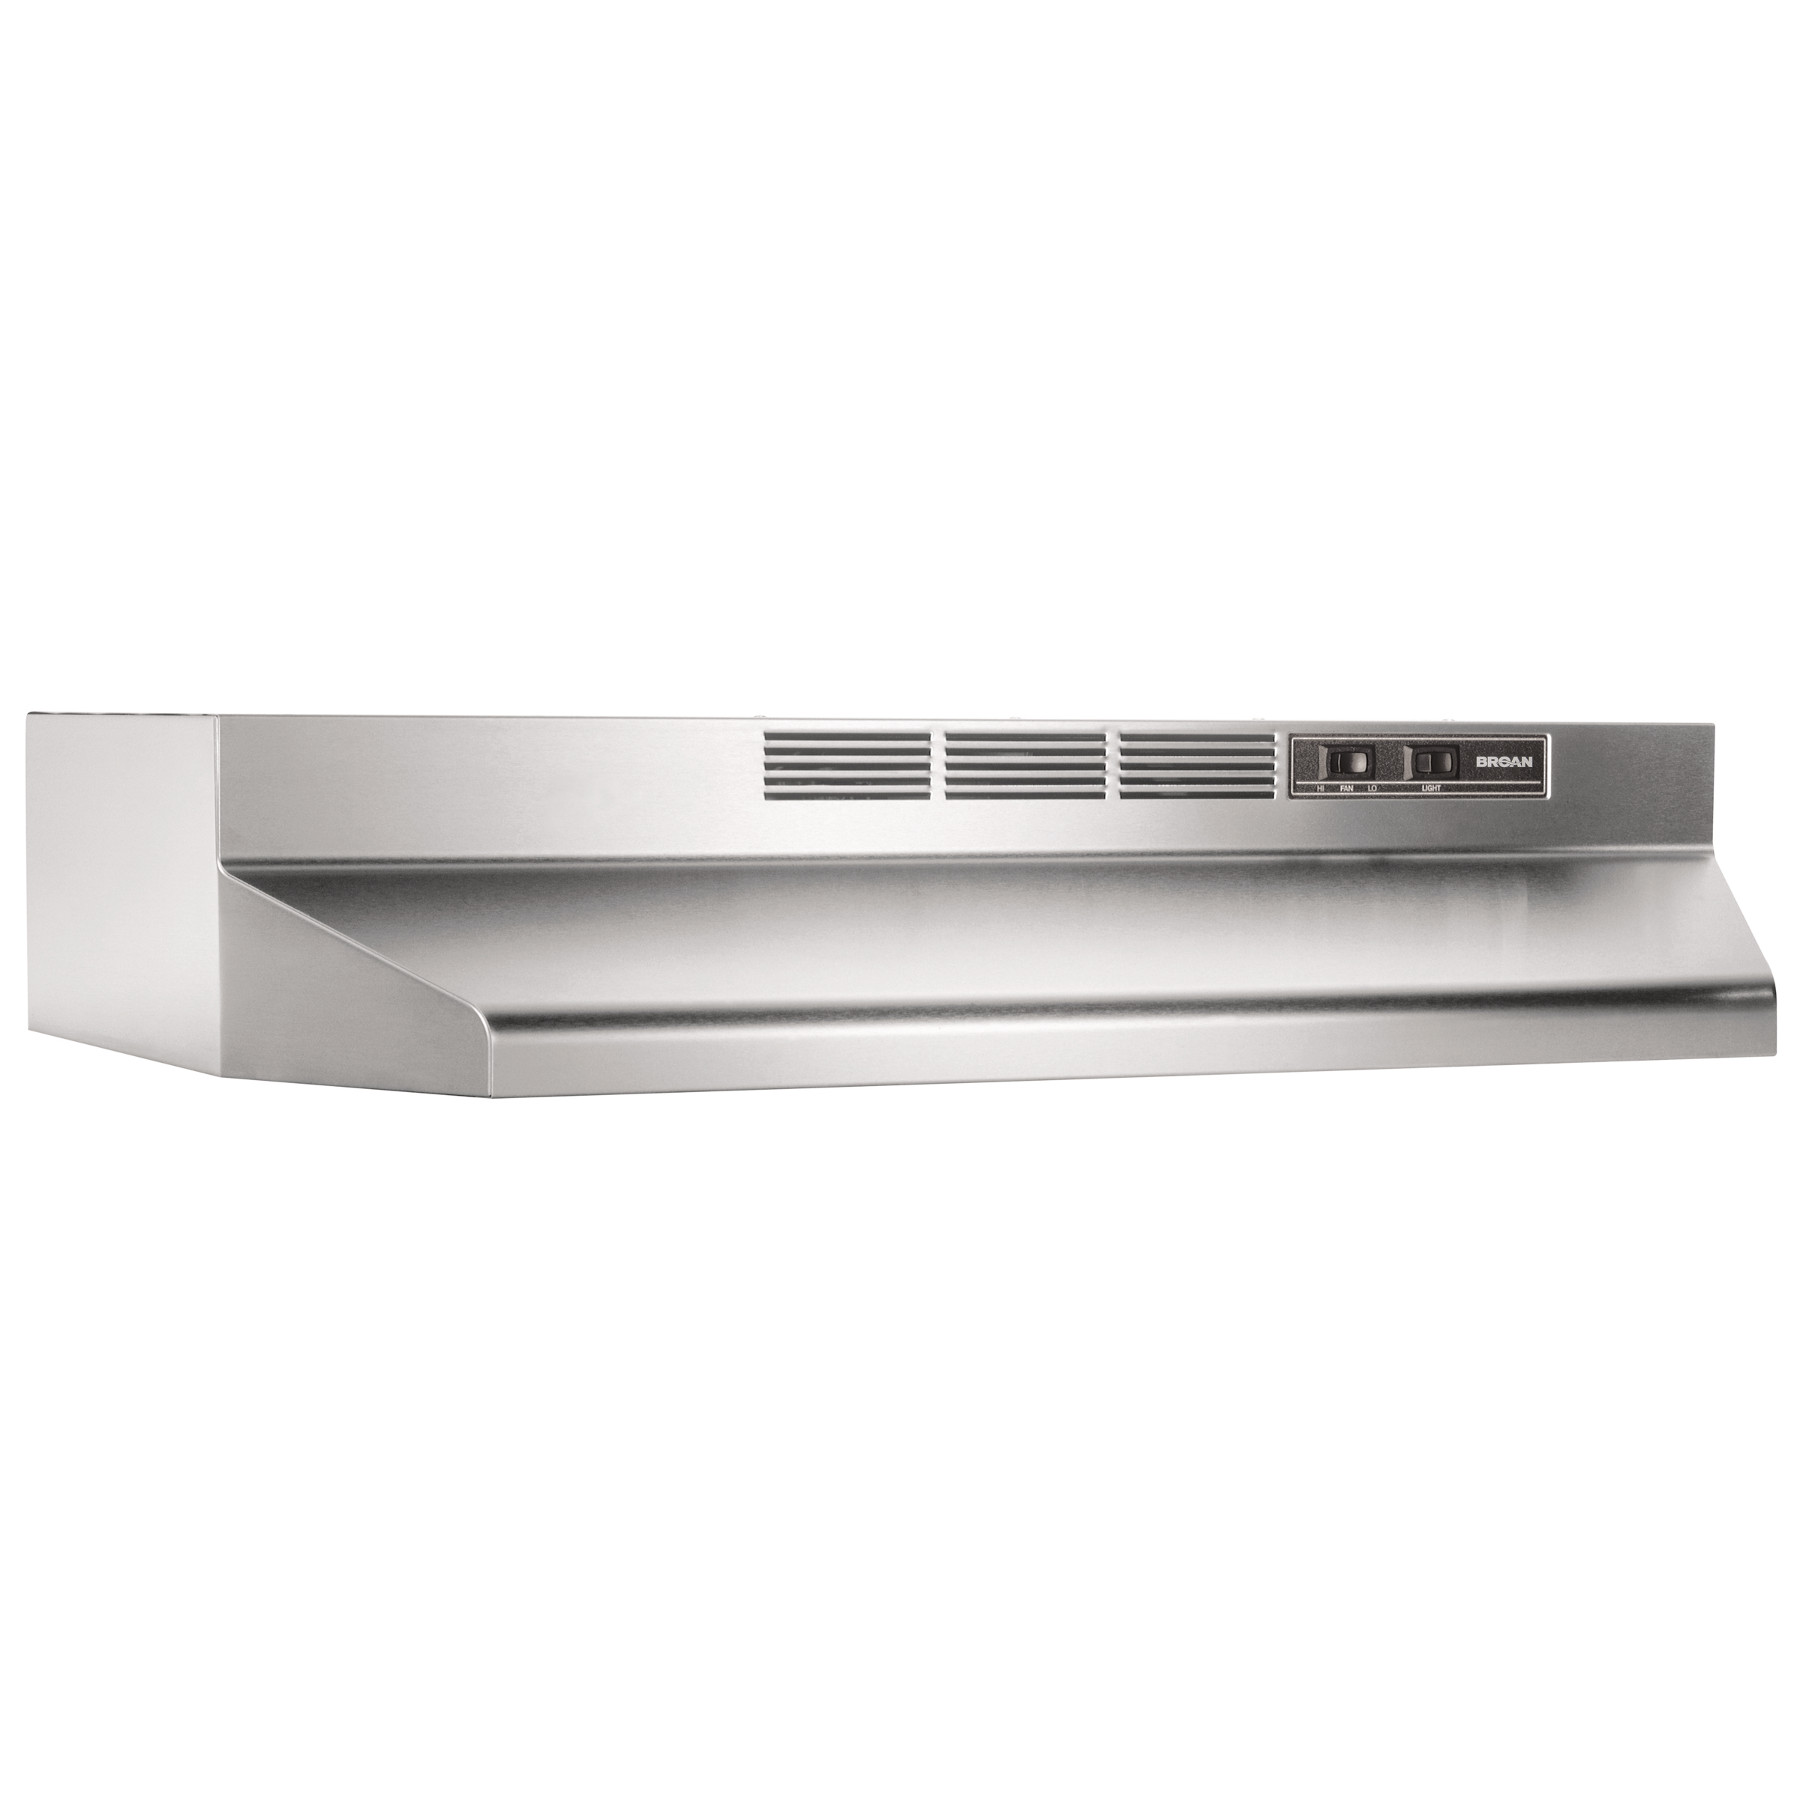 Broan-NuTone 413001 Non-Ducted Ductless Range Hood with Lights Exhaust Fan 